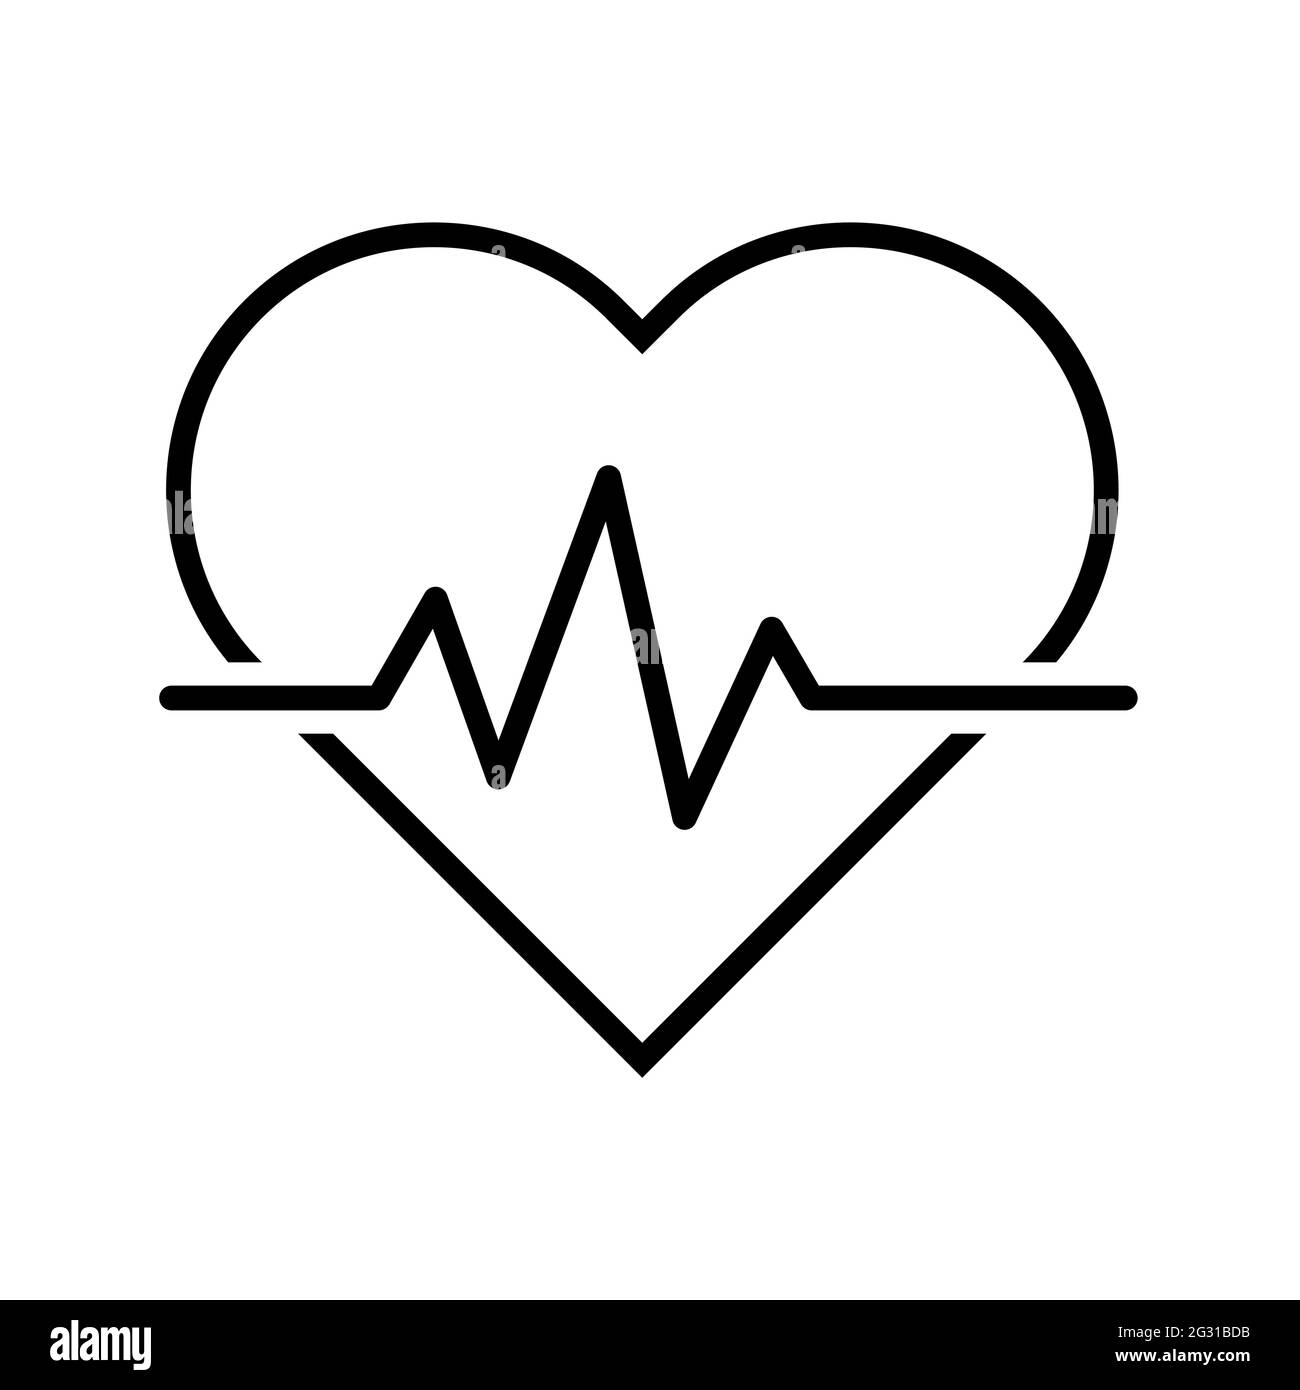 Hearth beat line icon, health medical heartbeat symbol isolated on ...